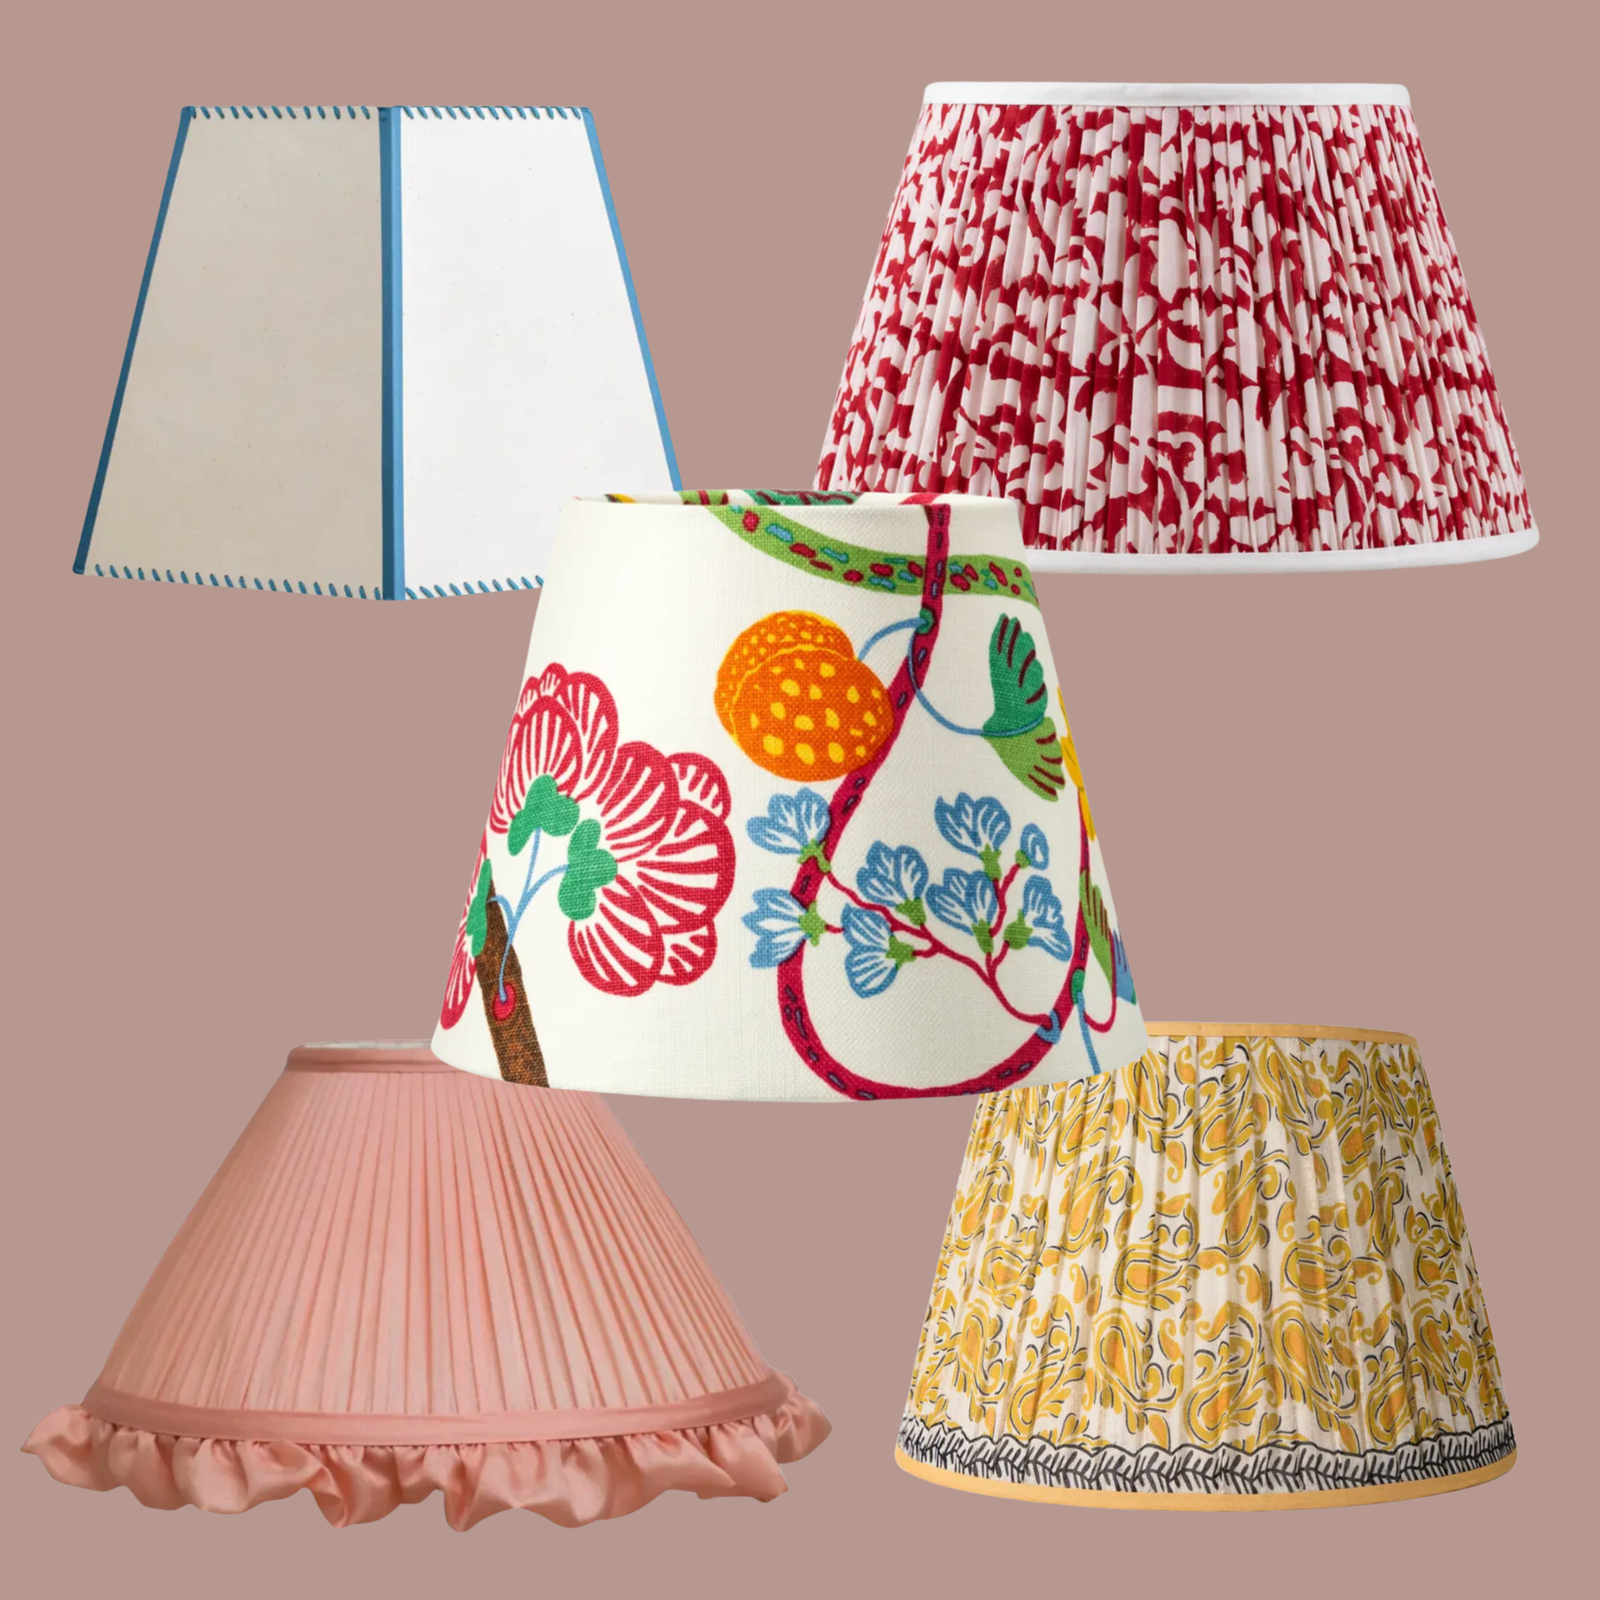 Our editors' picks of the best lampshades